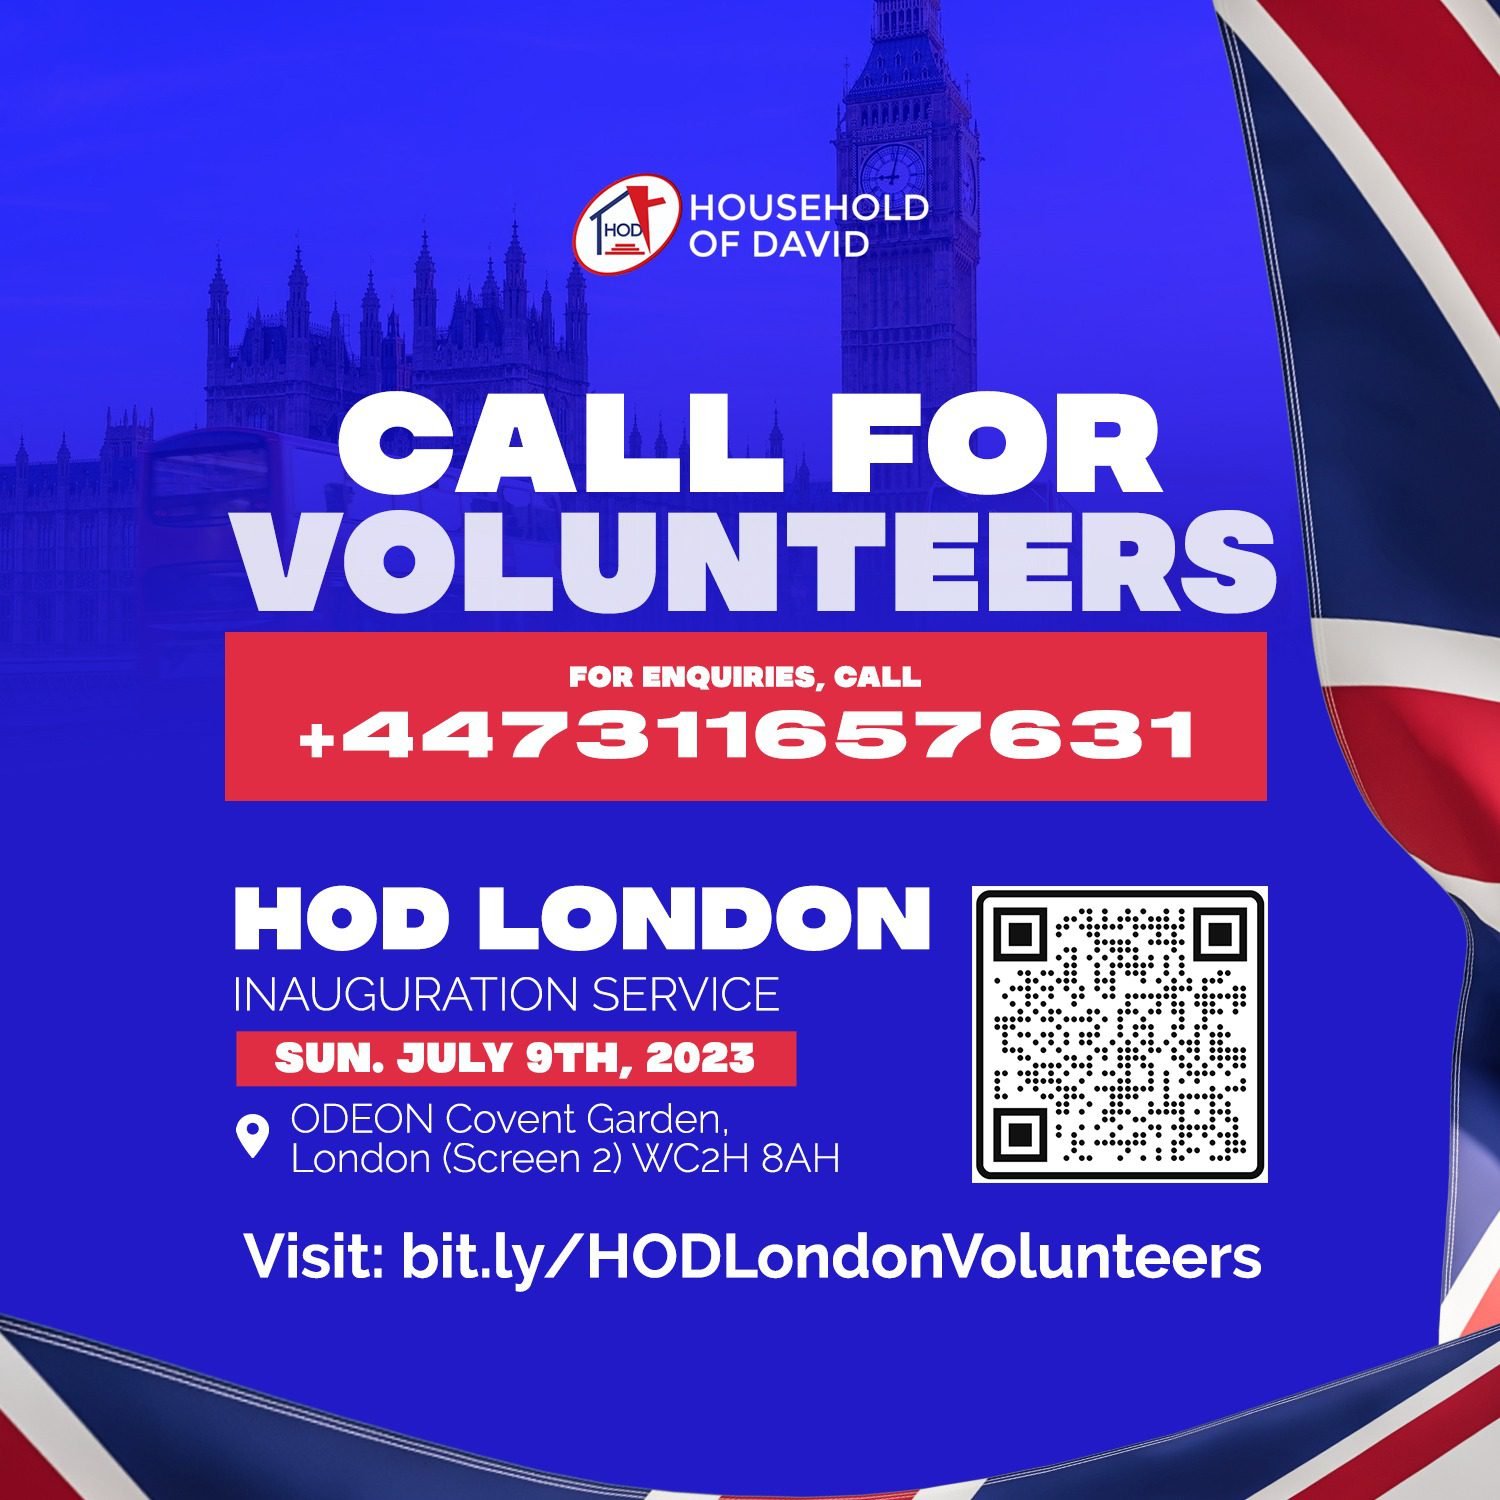 HOD LONDON CALL FOR VOLUNTEERS